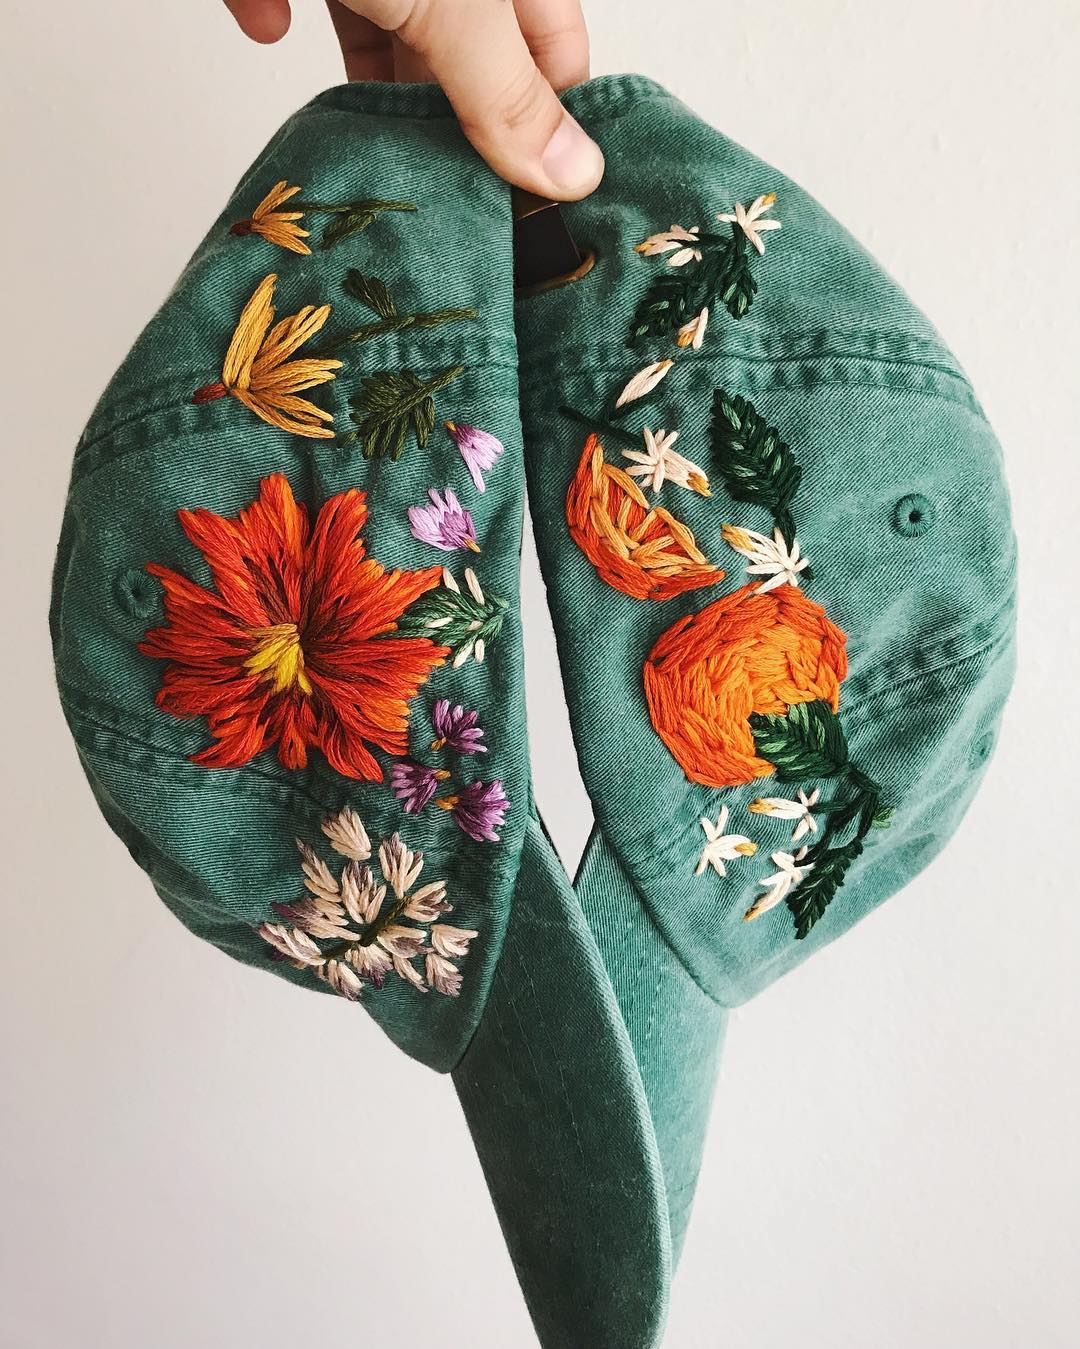 Embroidered hats by Lexi Mire